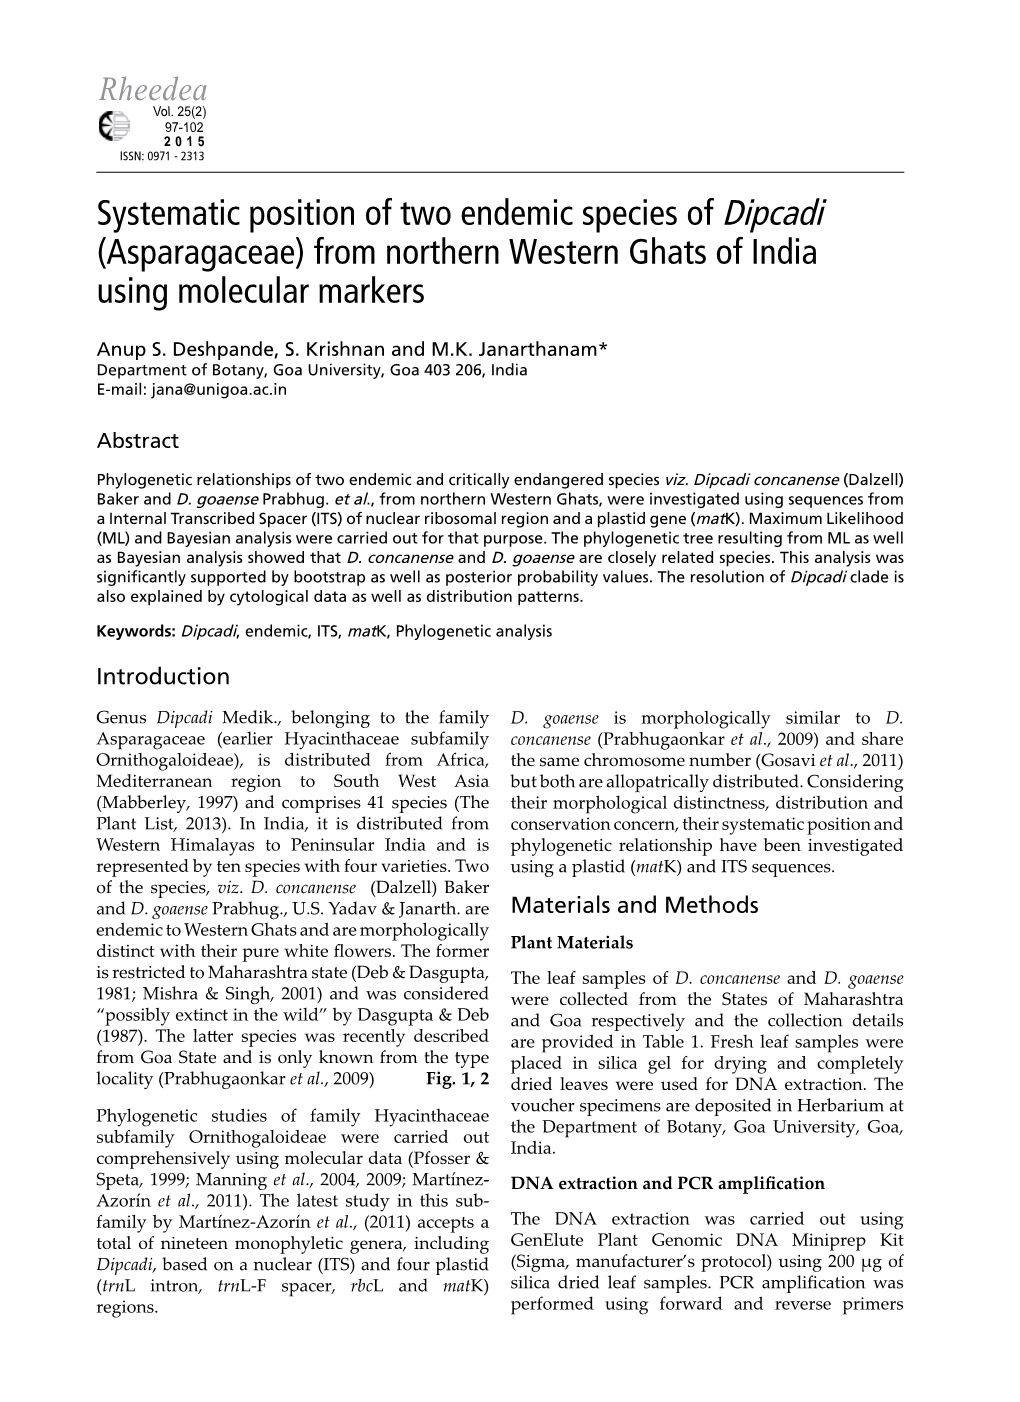 Systematic Position of Two Endemic Species of Dipcadi (Asparagaceae) from Northern Western Ghats of India Using Molecular Markers